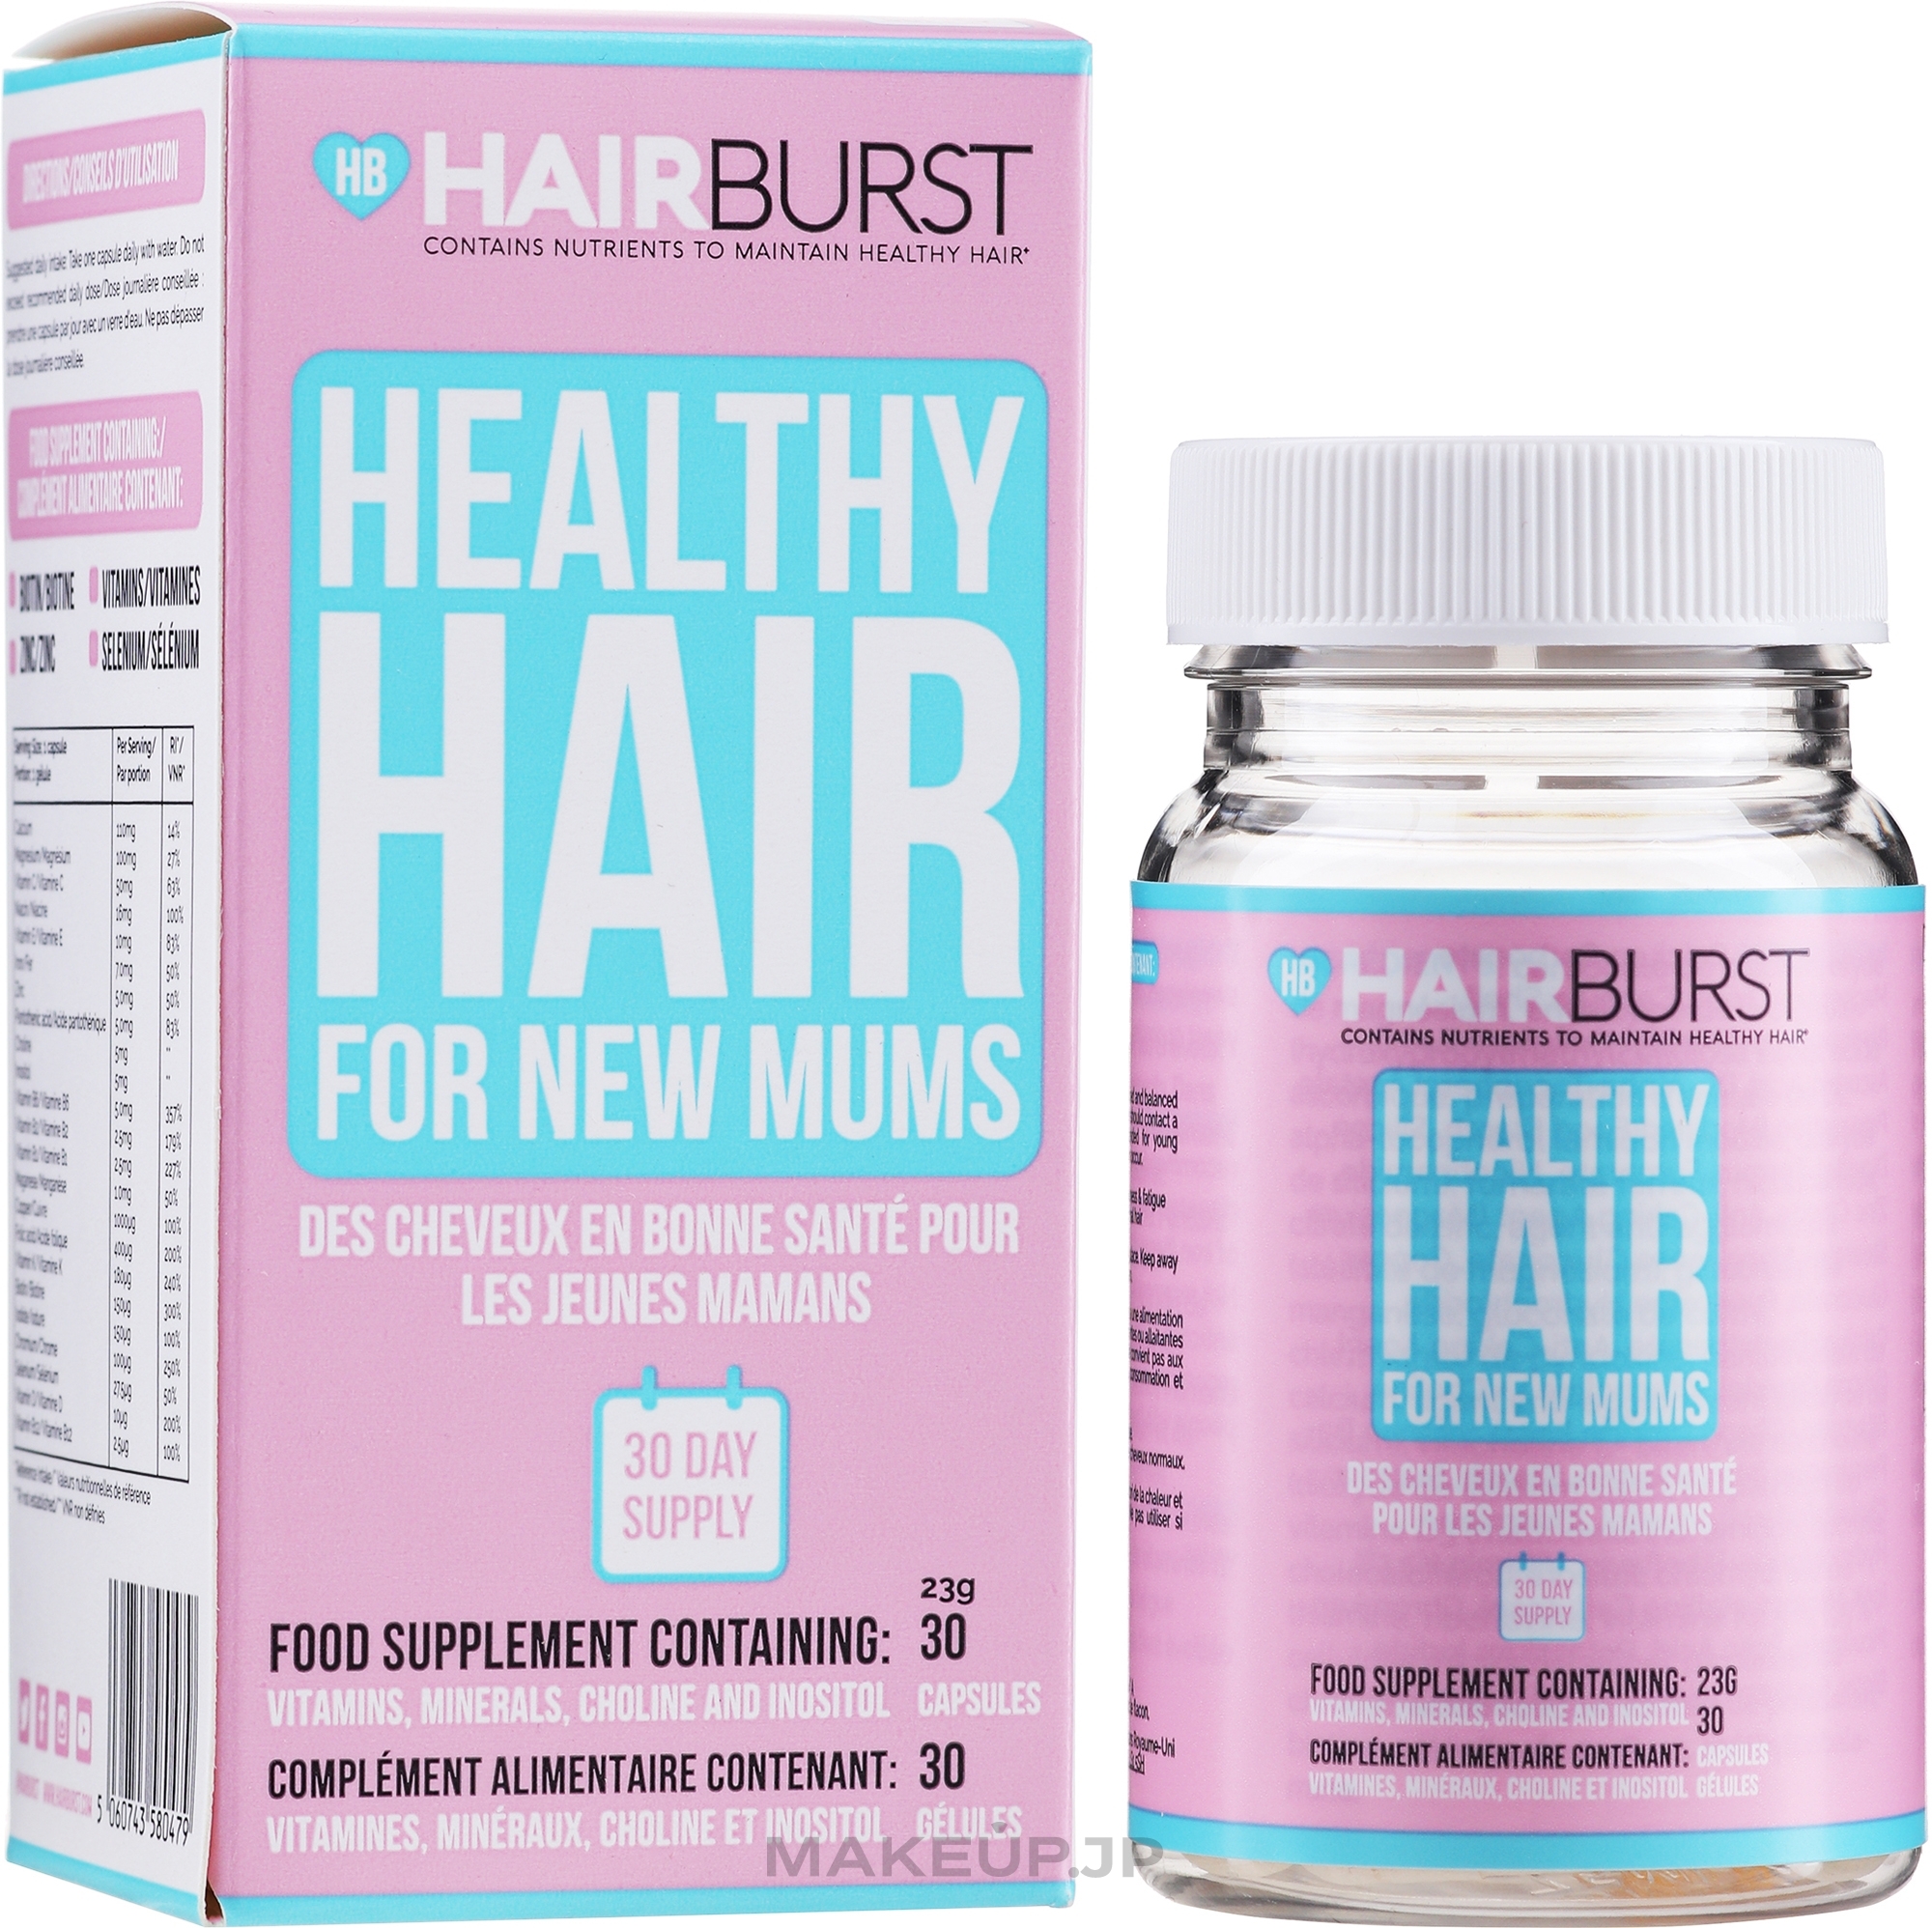 Healthy Hair Vitamins for New Mums, 30 capsules - Hairburst Healthy Hair Vitamins For New Mums — photo 30 szt.